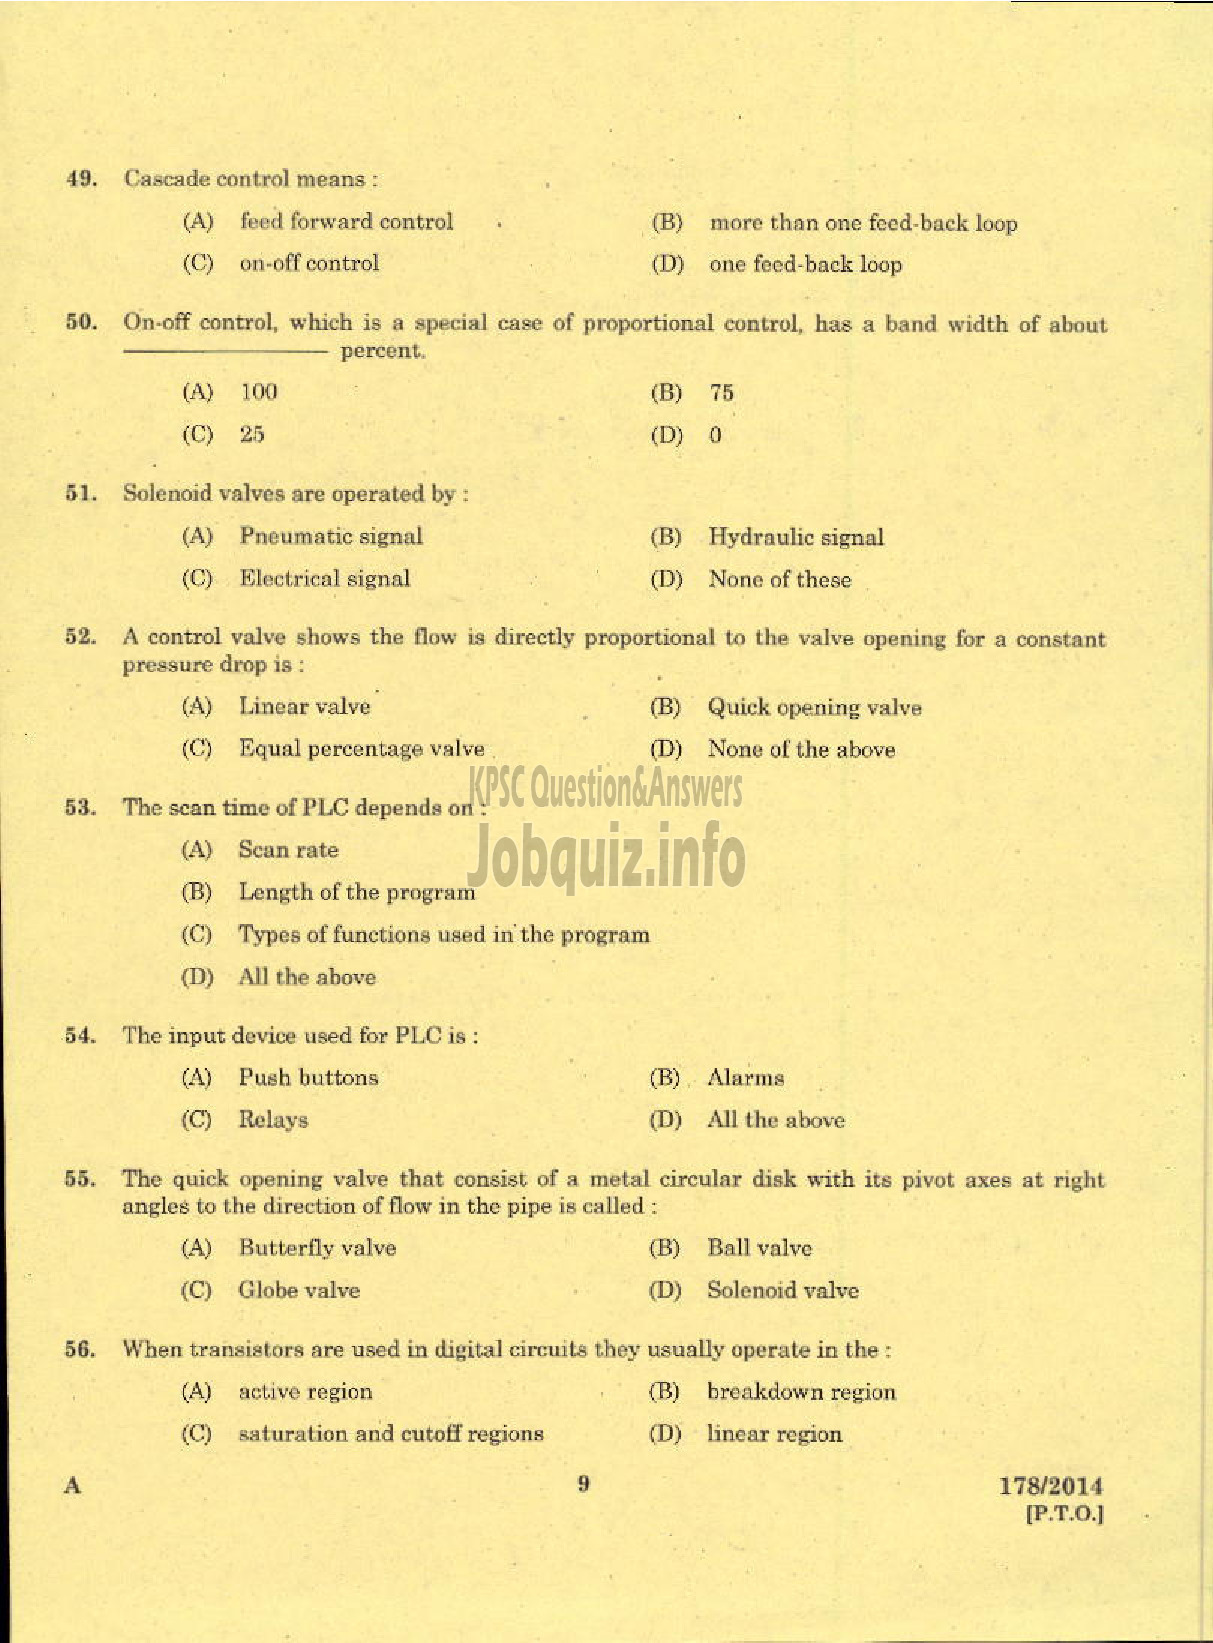 Kerala PSC Question Paper - TRADESMAN ELECTRONICS AND INSTRUMENTATION TECHNICAL EDUCATION KNR-7